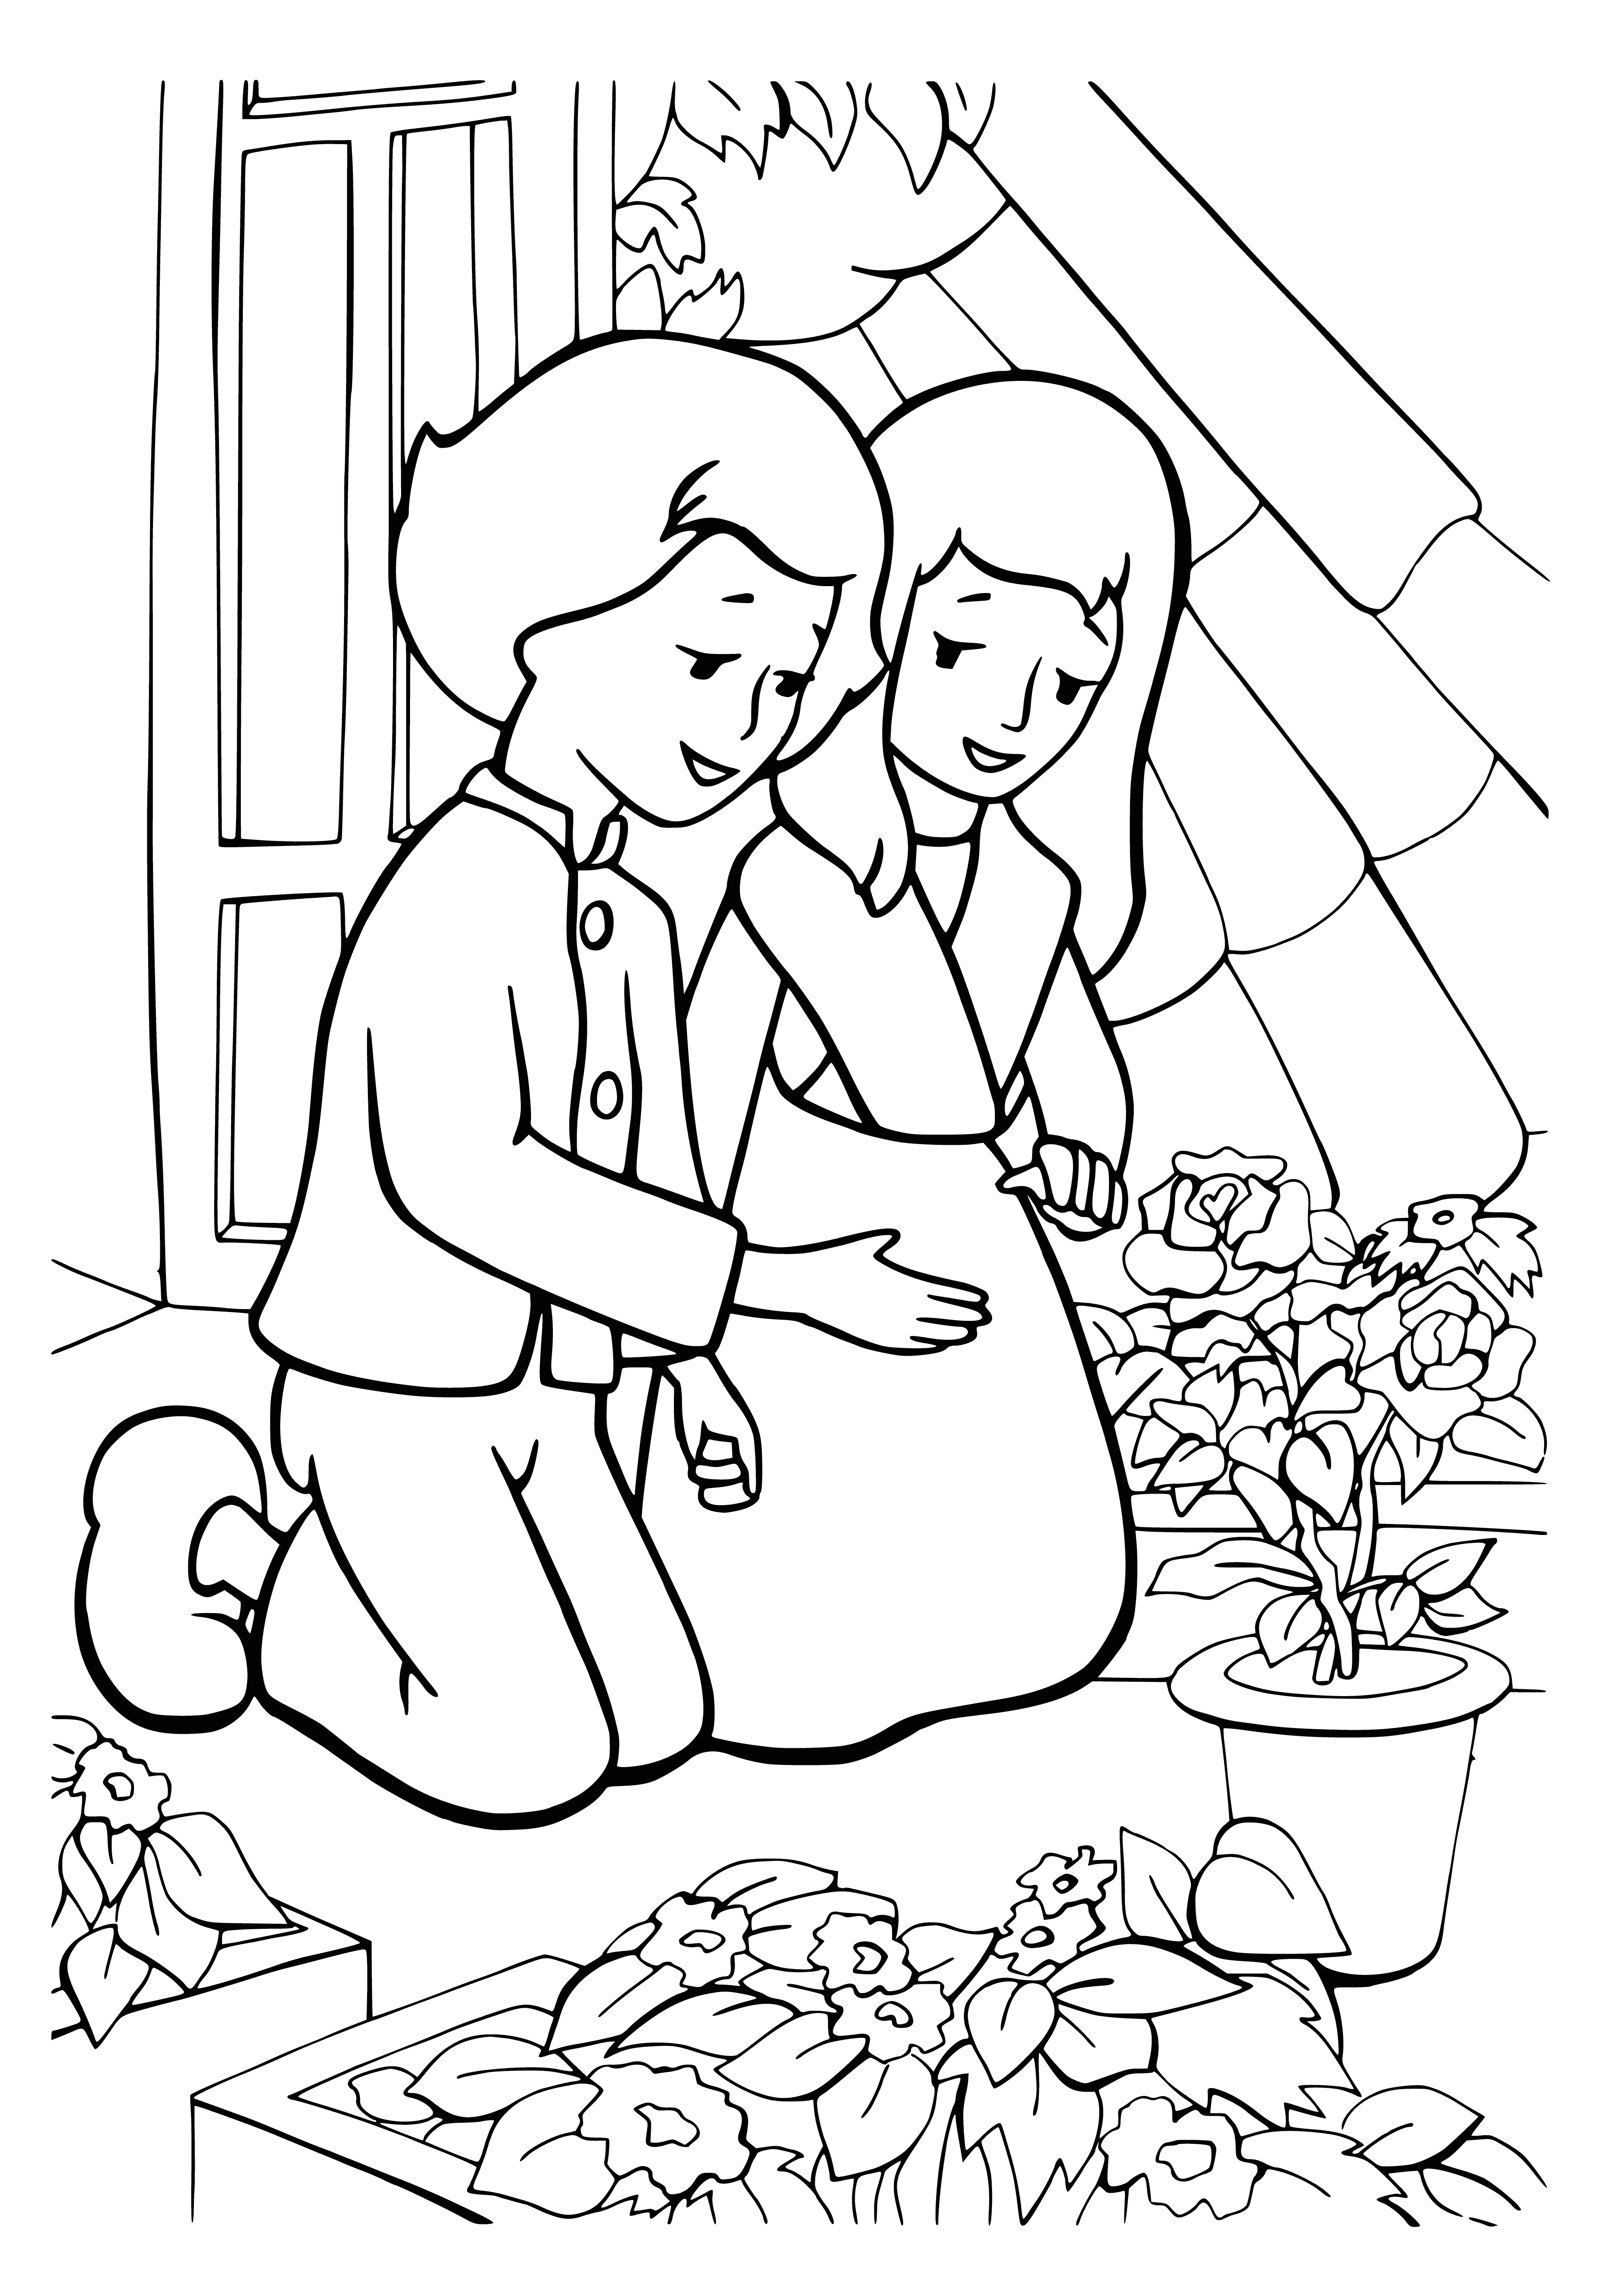 coloring page: Boy and girl look sadly at something off to the side. Girl has blonde hair, wearing a white dress; boy has dark hair, wearing a blue coat. #coloringpage